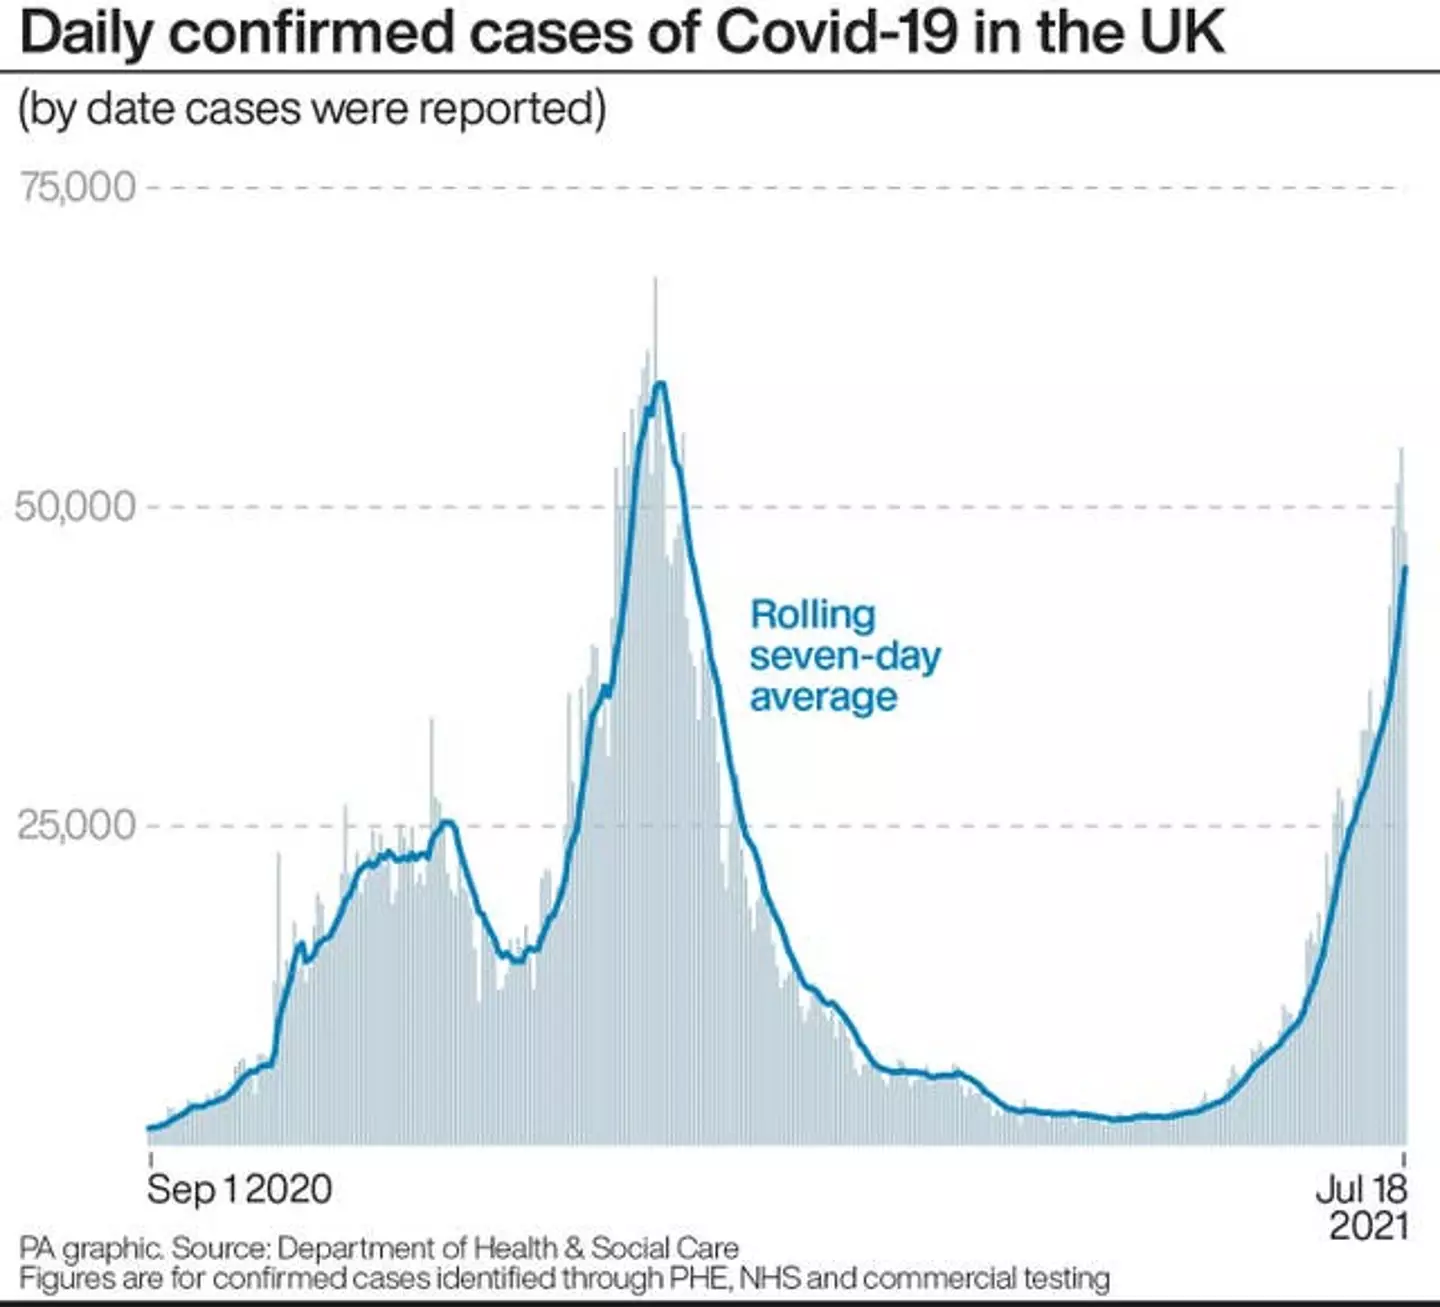 The rate of infection in the UK is rising (